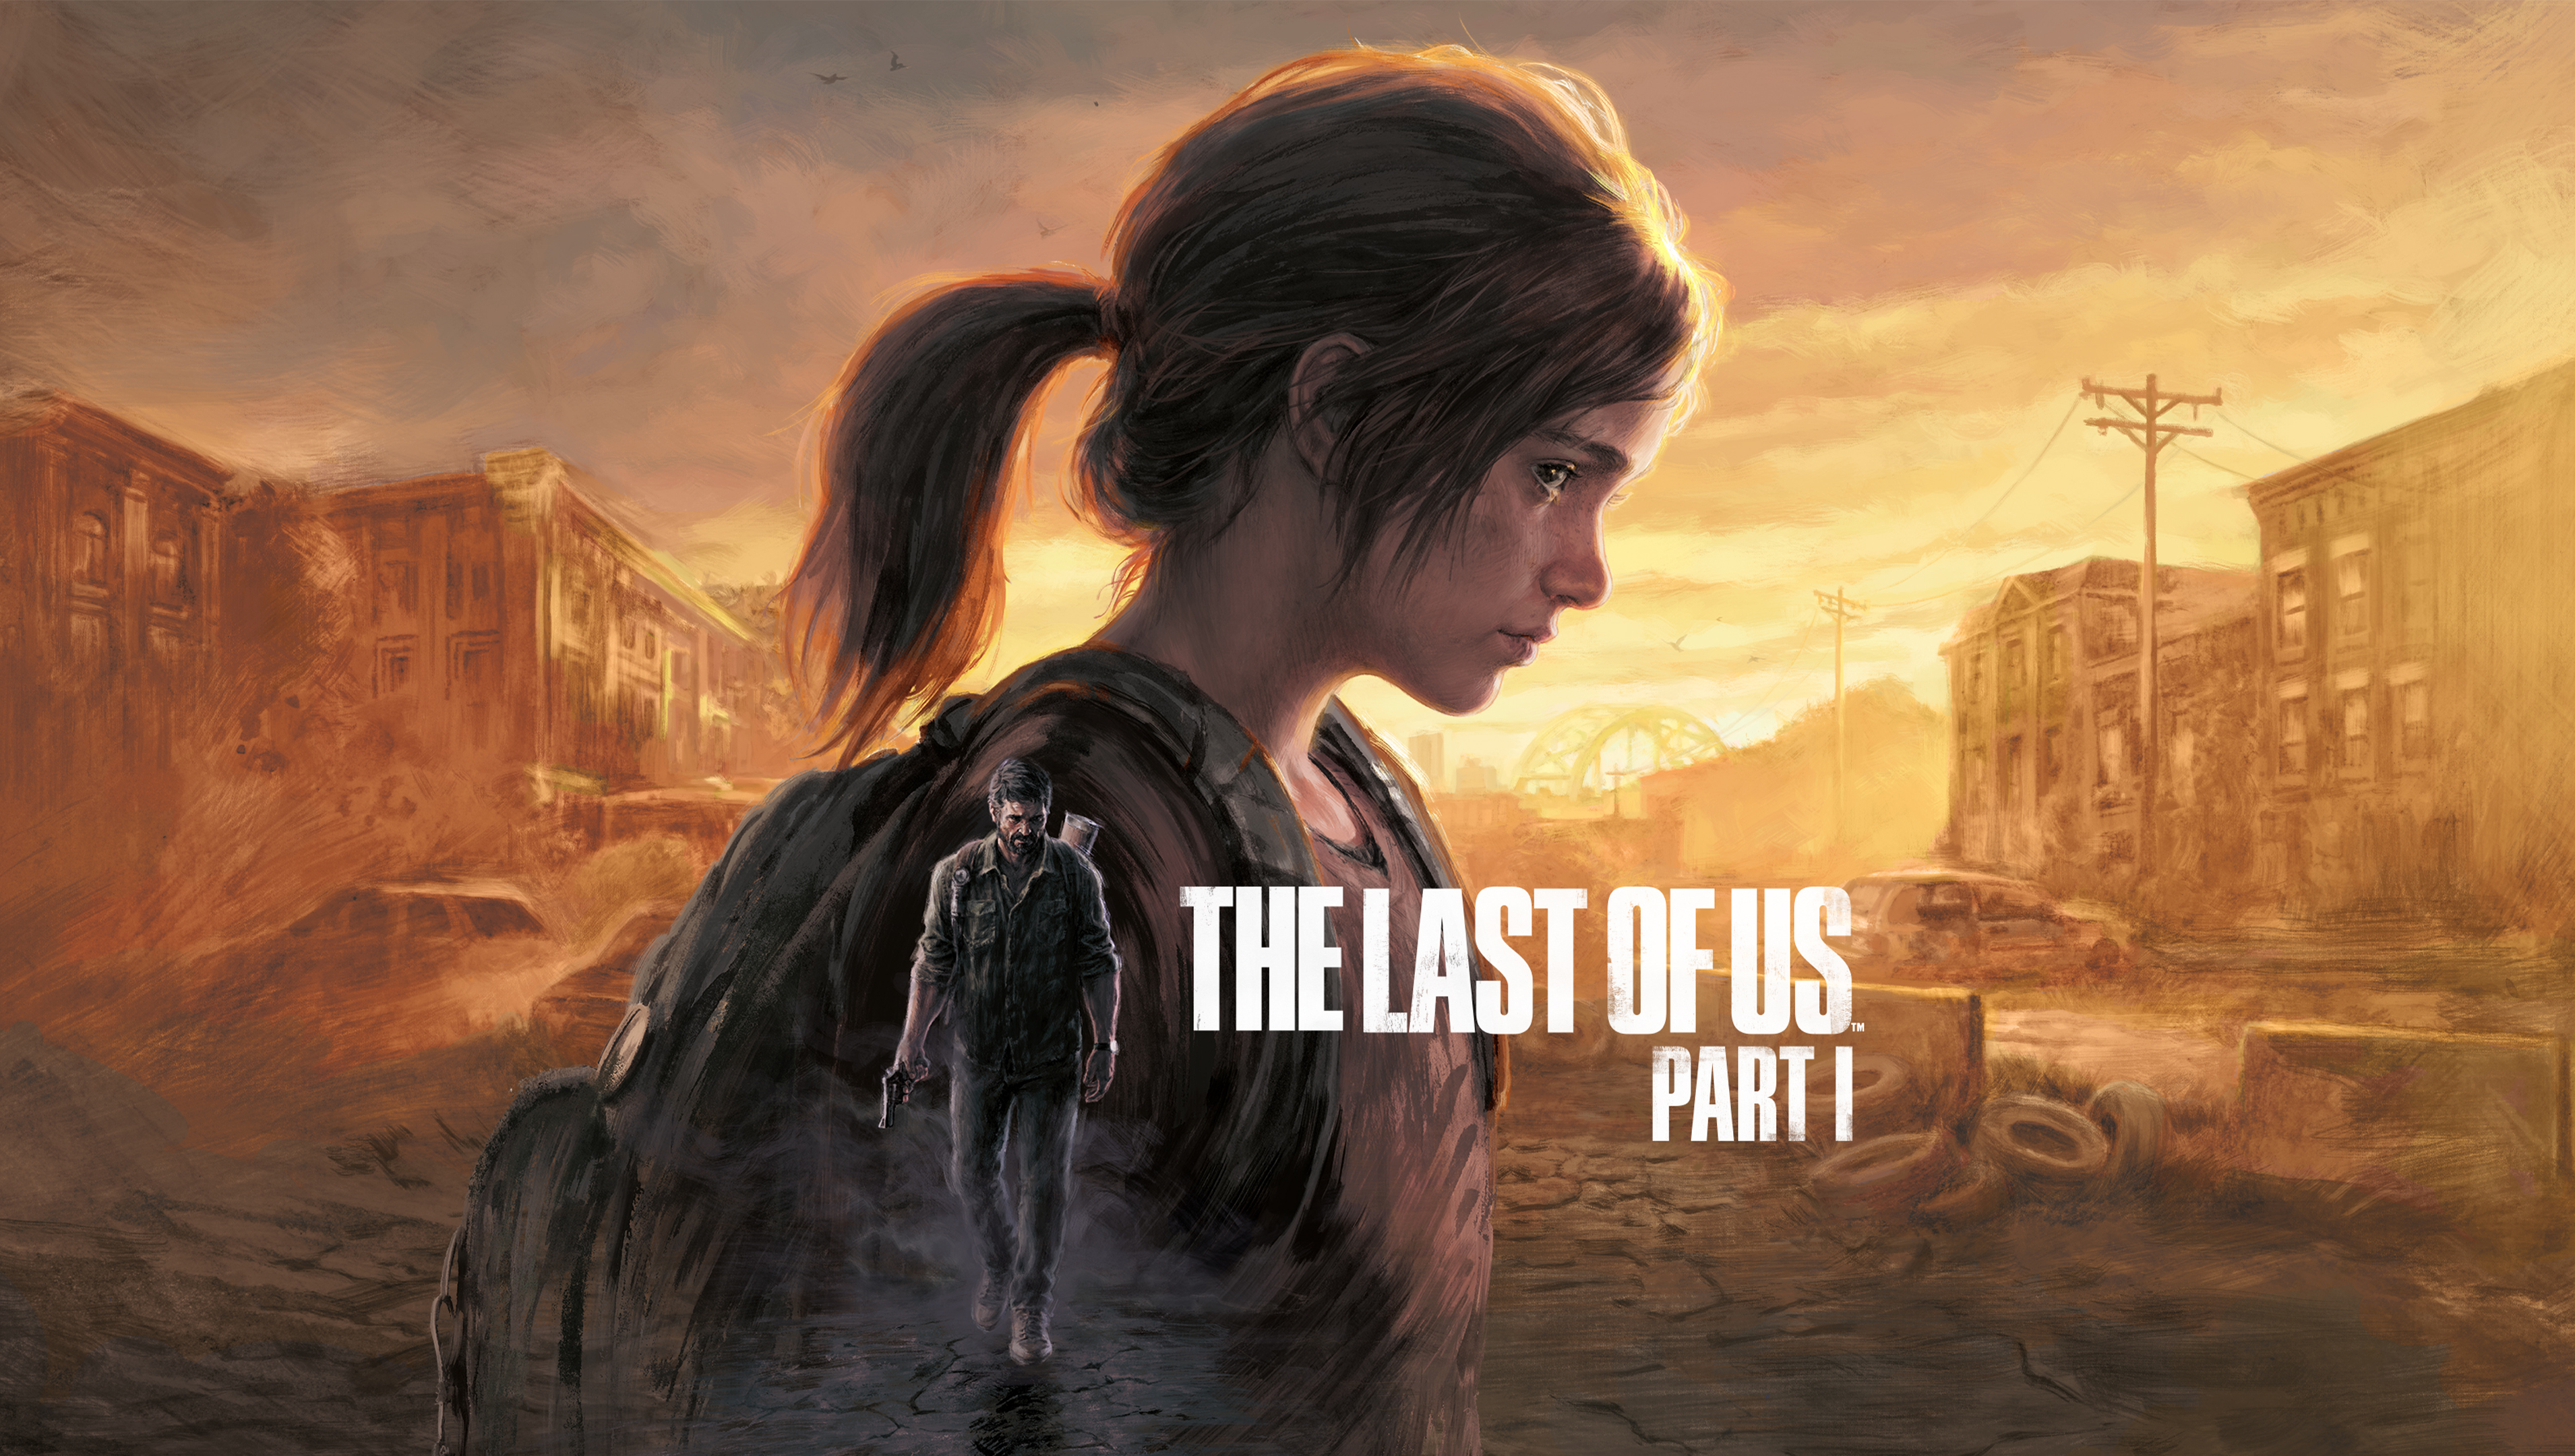 The Growing Future of The Last of Us